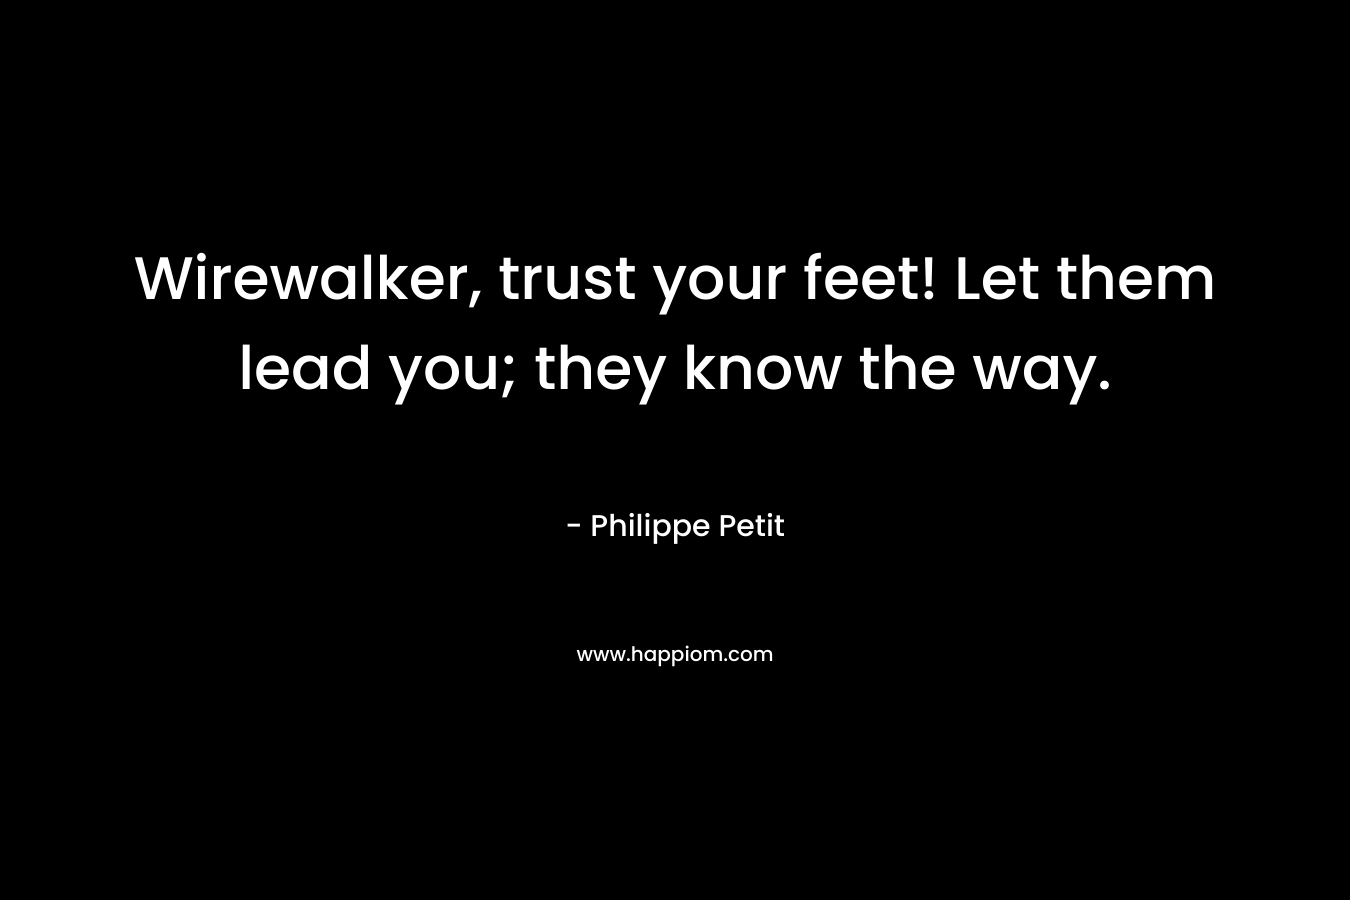 Wirewalker, trust your feet! Let them lead you; they know the way. – Philippe Petit